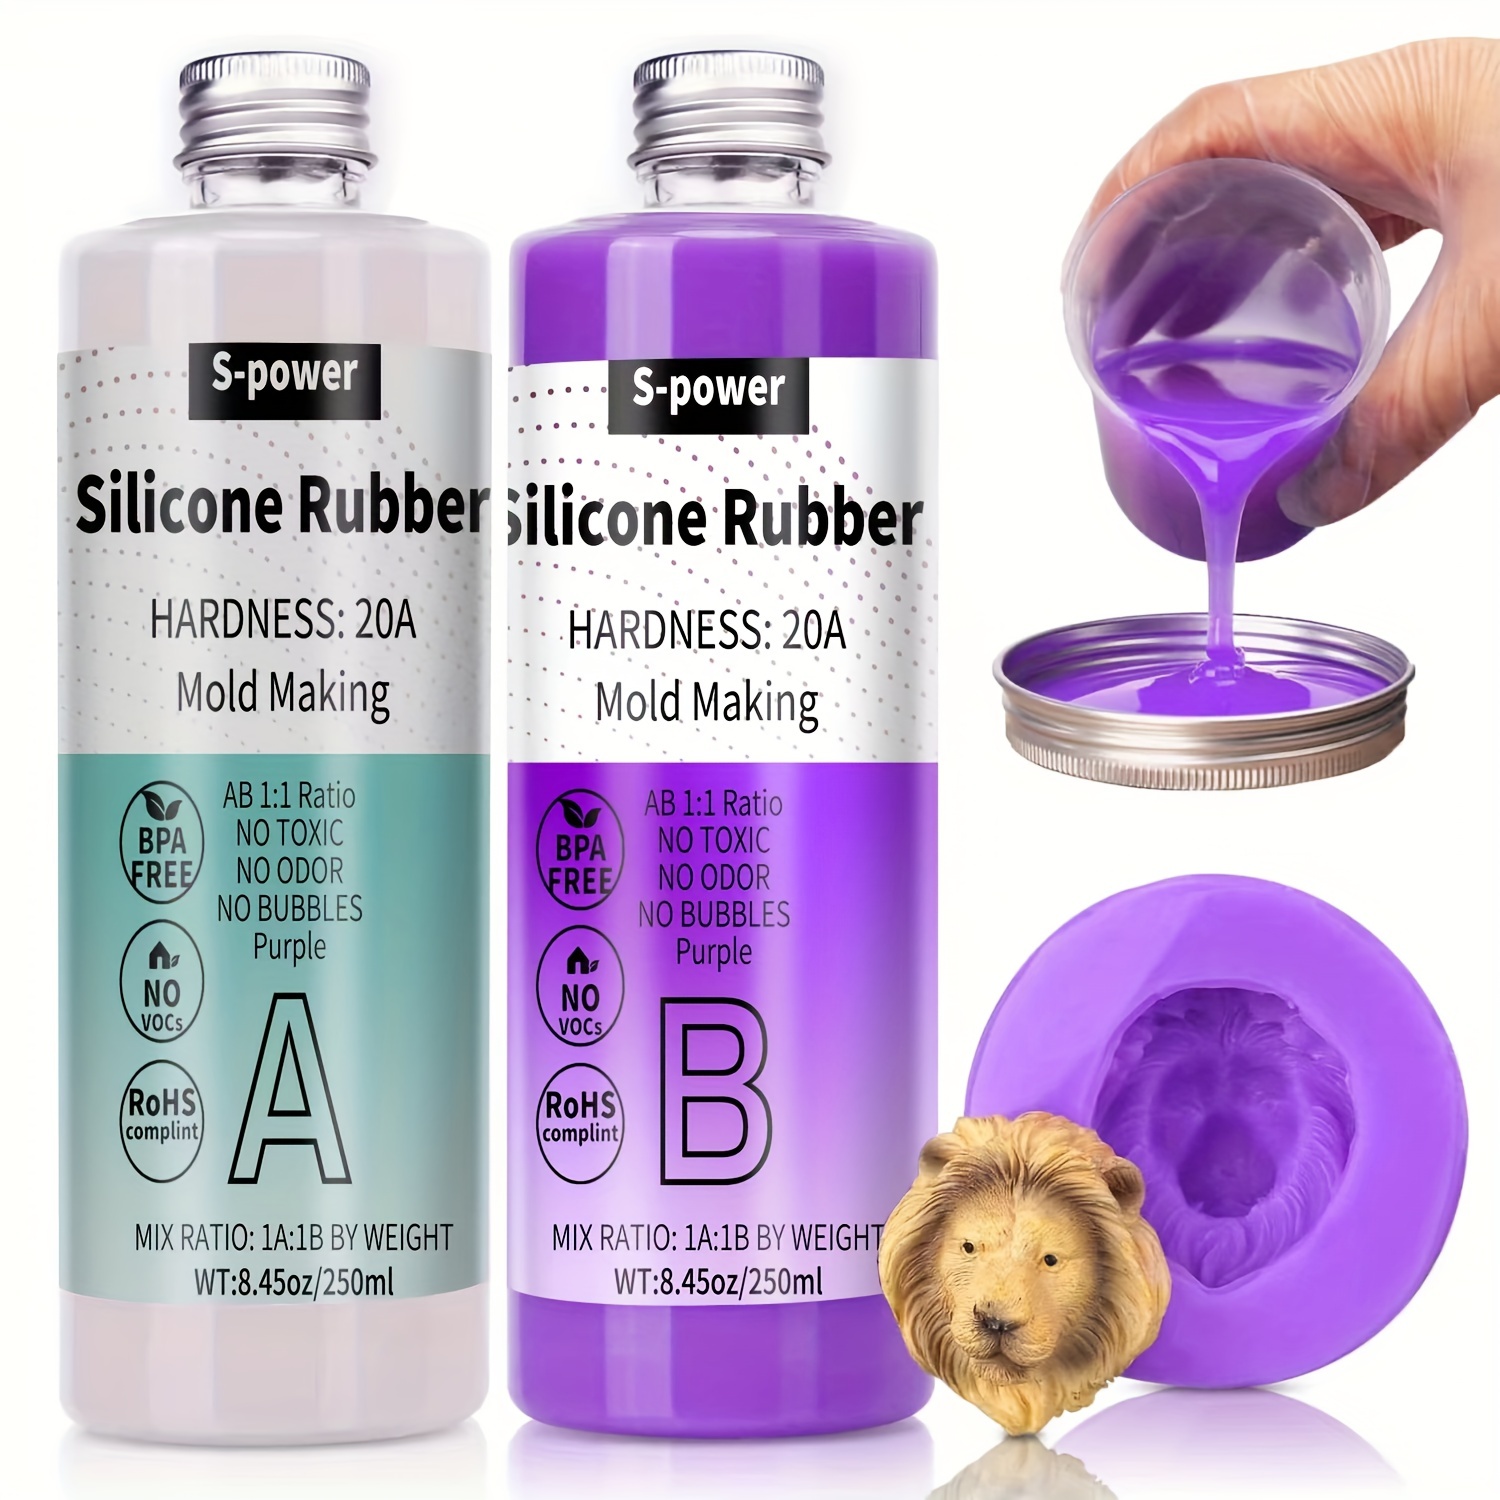 

Liquid Silicone Rubber For Diy Mold Making Kit, Non-toxic Purple Silicone Ab Mix Ratio 1:1 For Chocolate, Candy, Fondant, Resin, Plaster Mold Making - (16.9oz) 20a (purple)